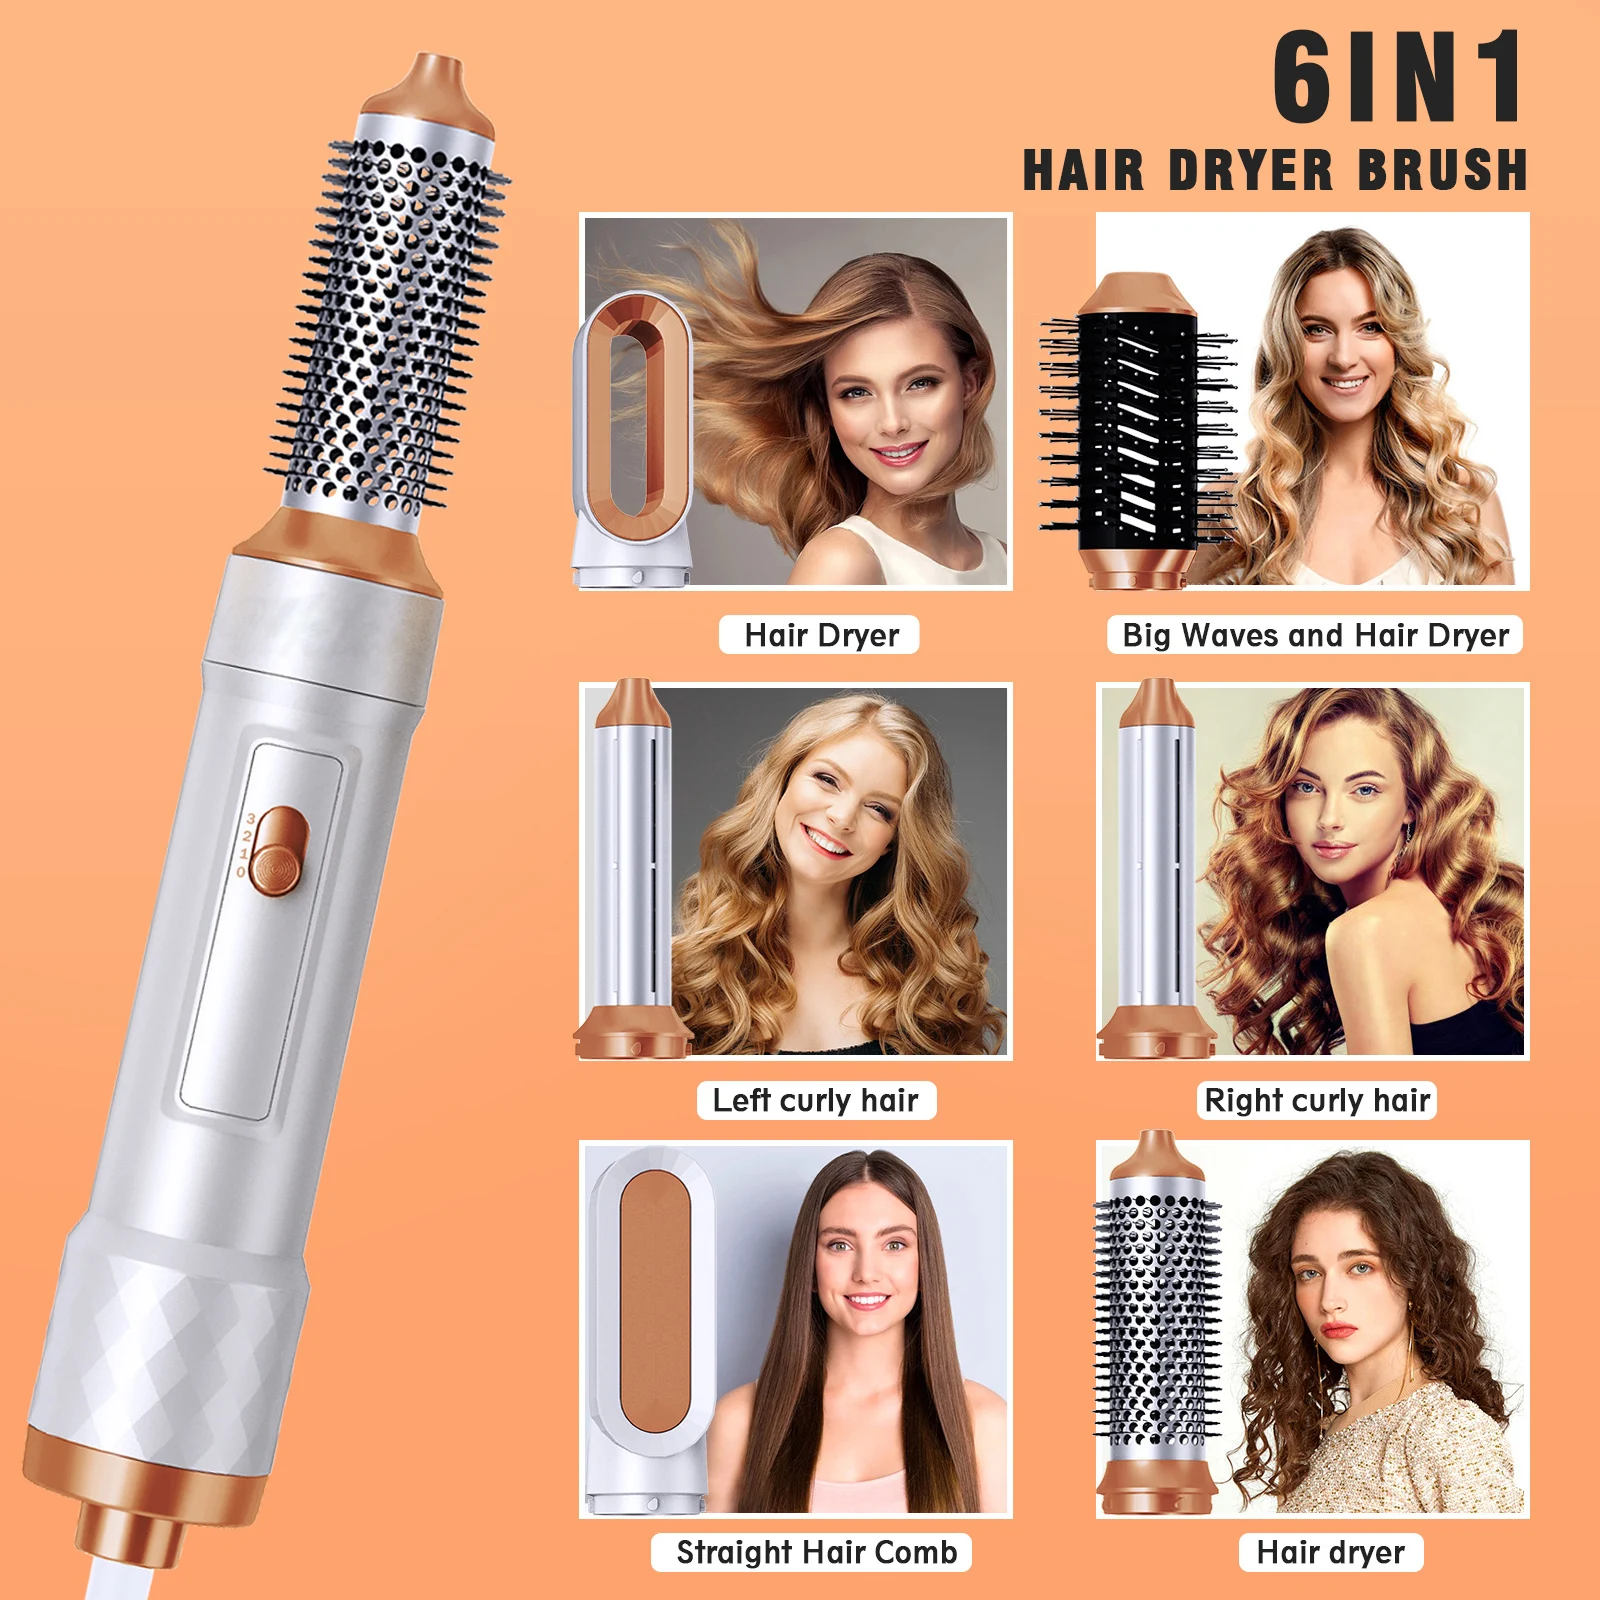 

Hair Dryer Brush 5 In 1 Hair Styler Negative Ion Hair Blower Brush Electric Hairdryer Blow Dryer Air Comb Curling Iron Wand